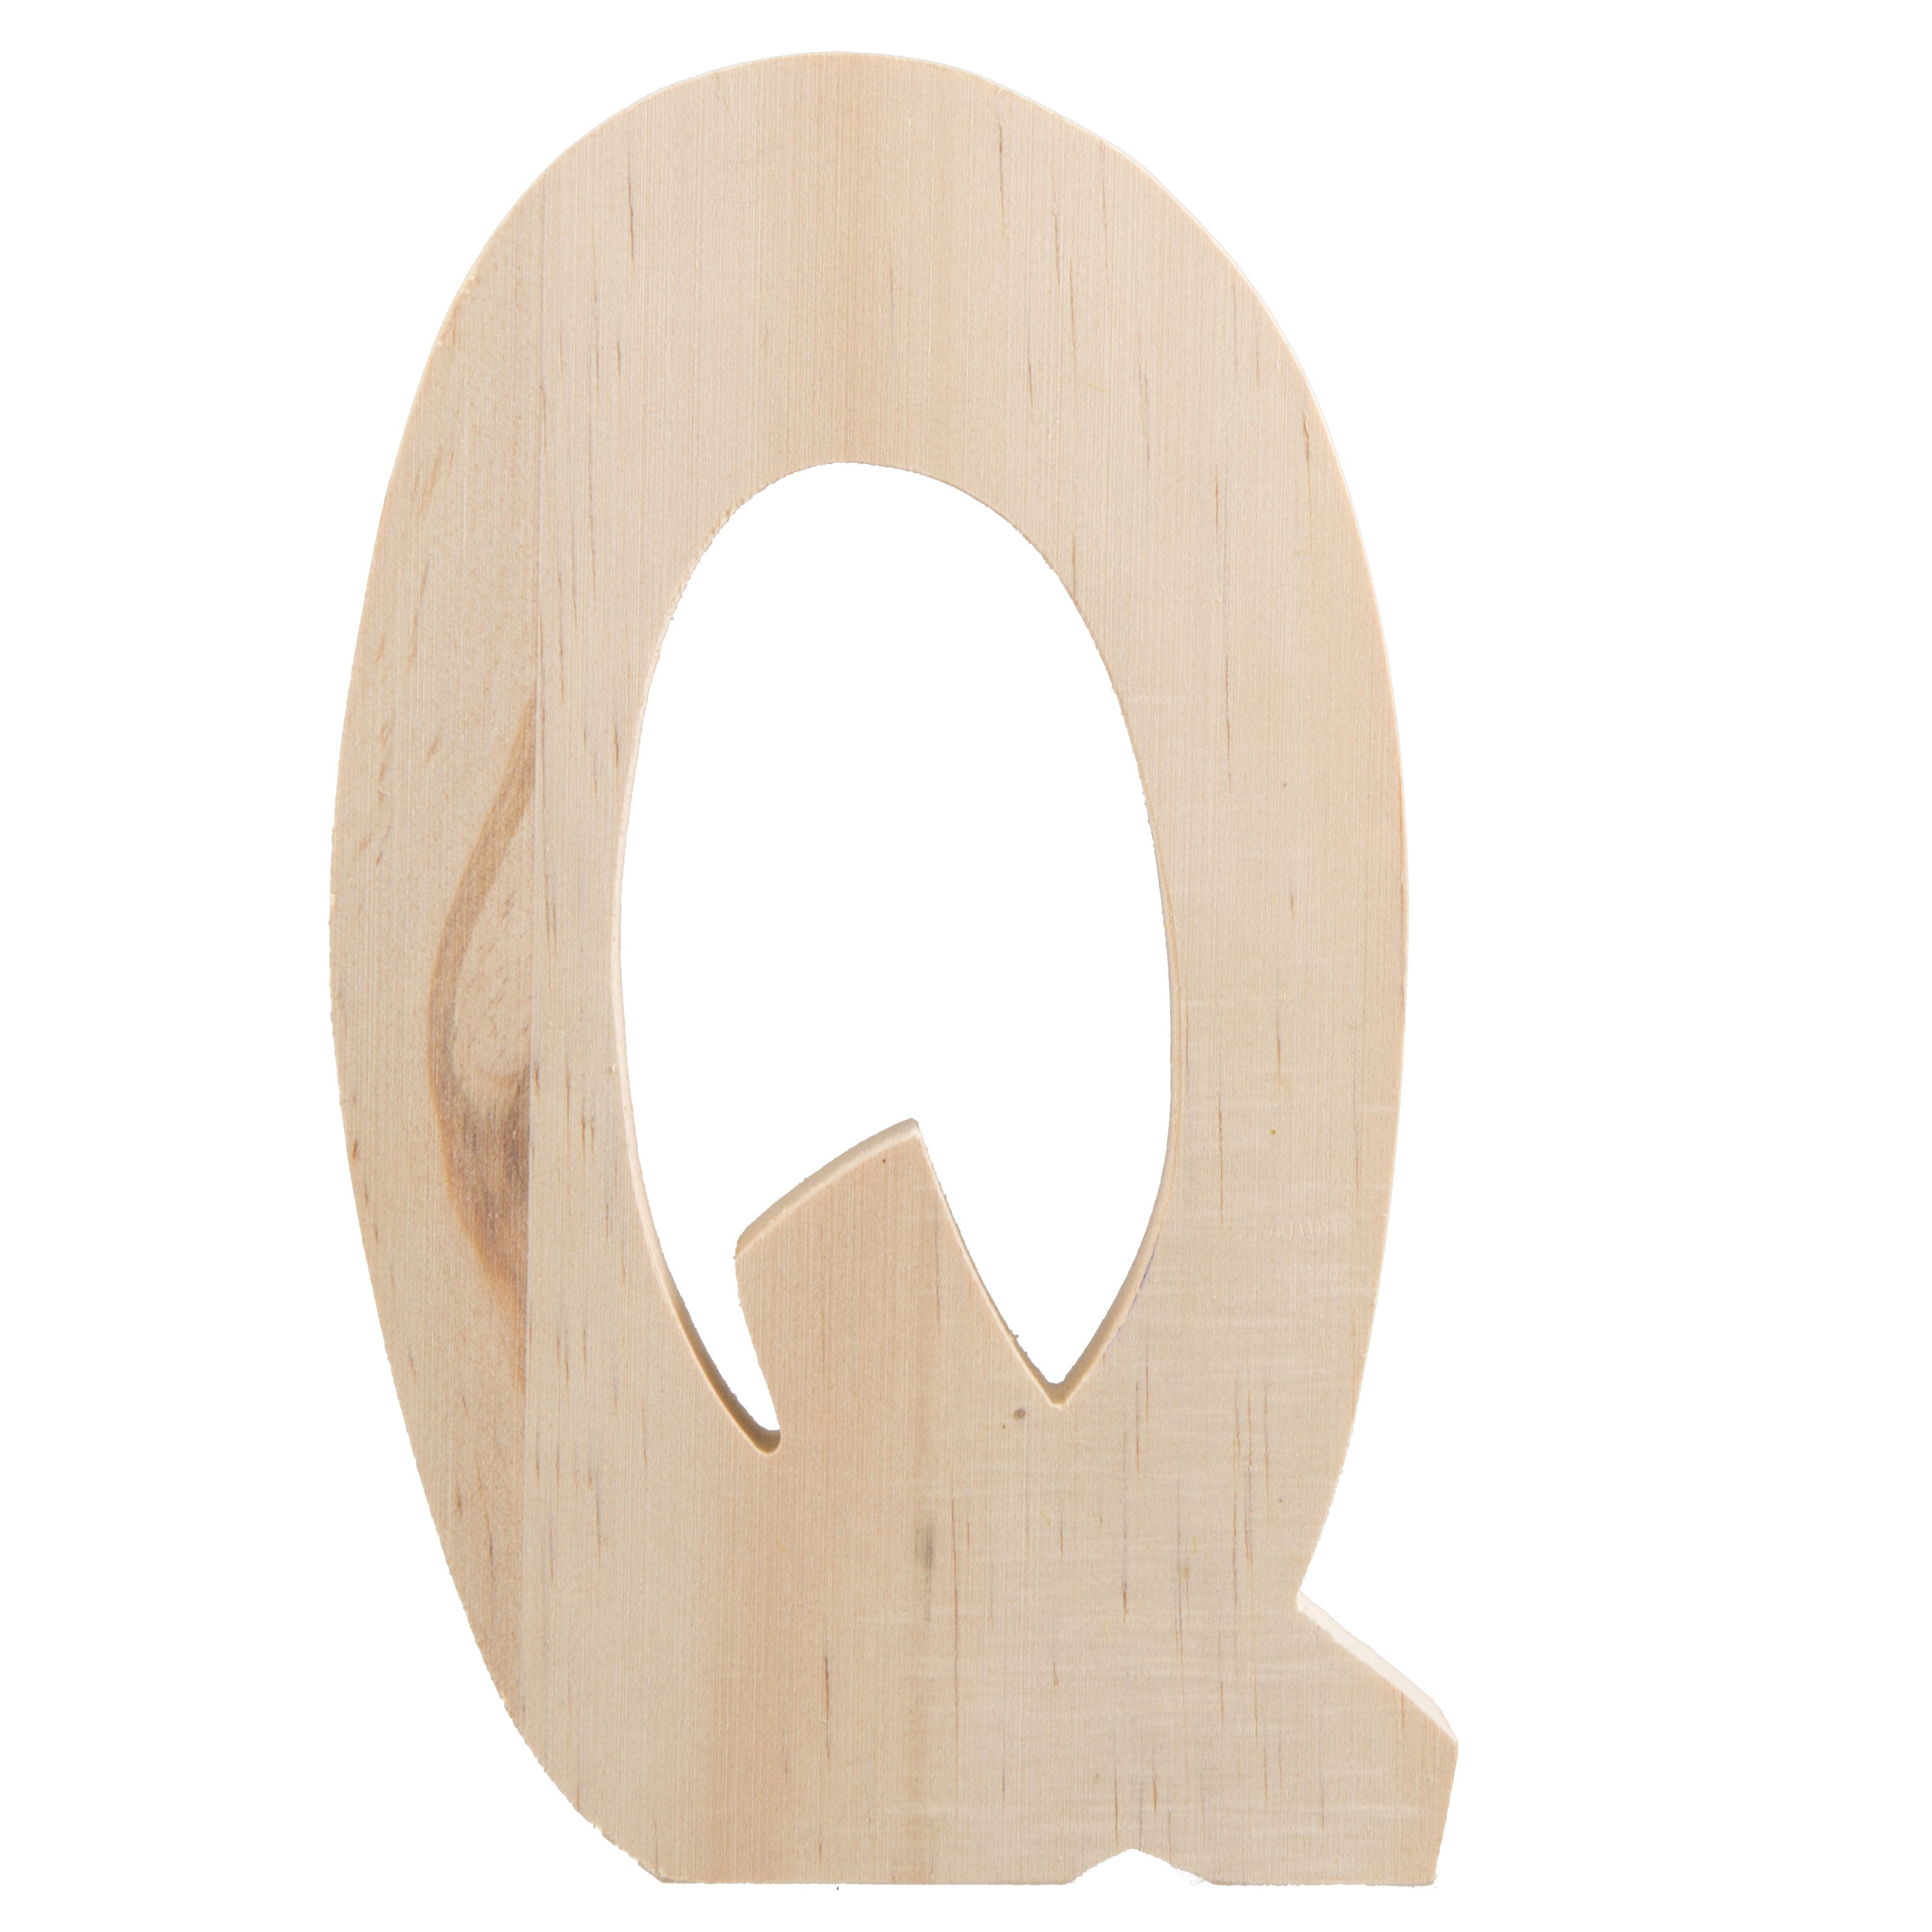 7.75" Chunky Wooden Letter: Q